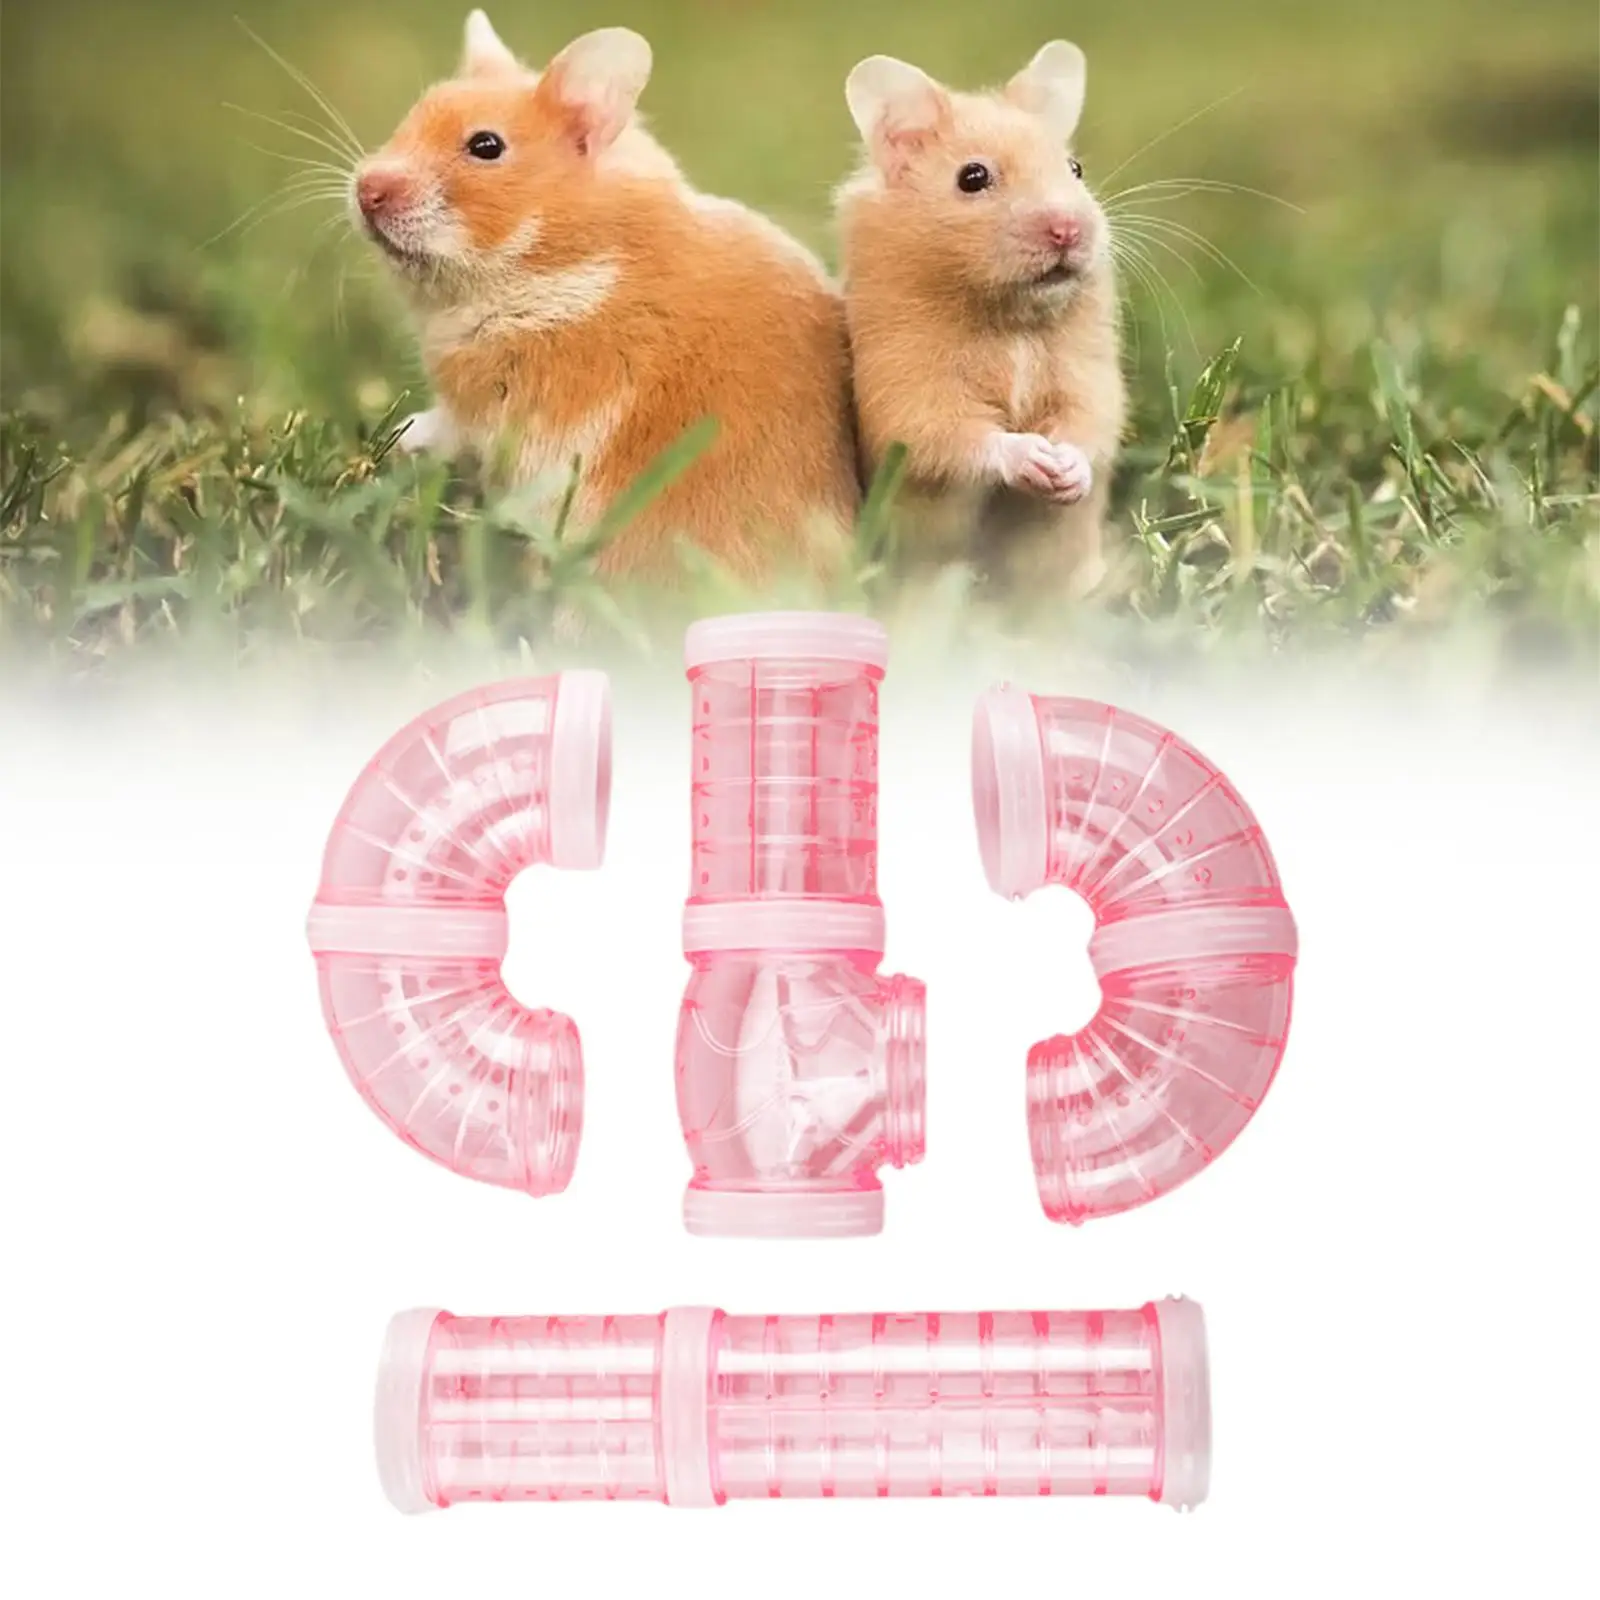 Hamster Tube Set Hamster Toy Transparent Maze Tunnel Connection Tunnel DIY